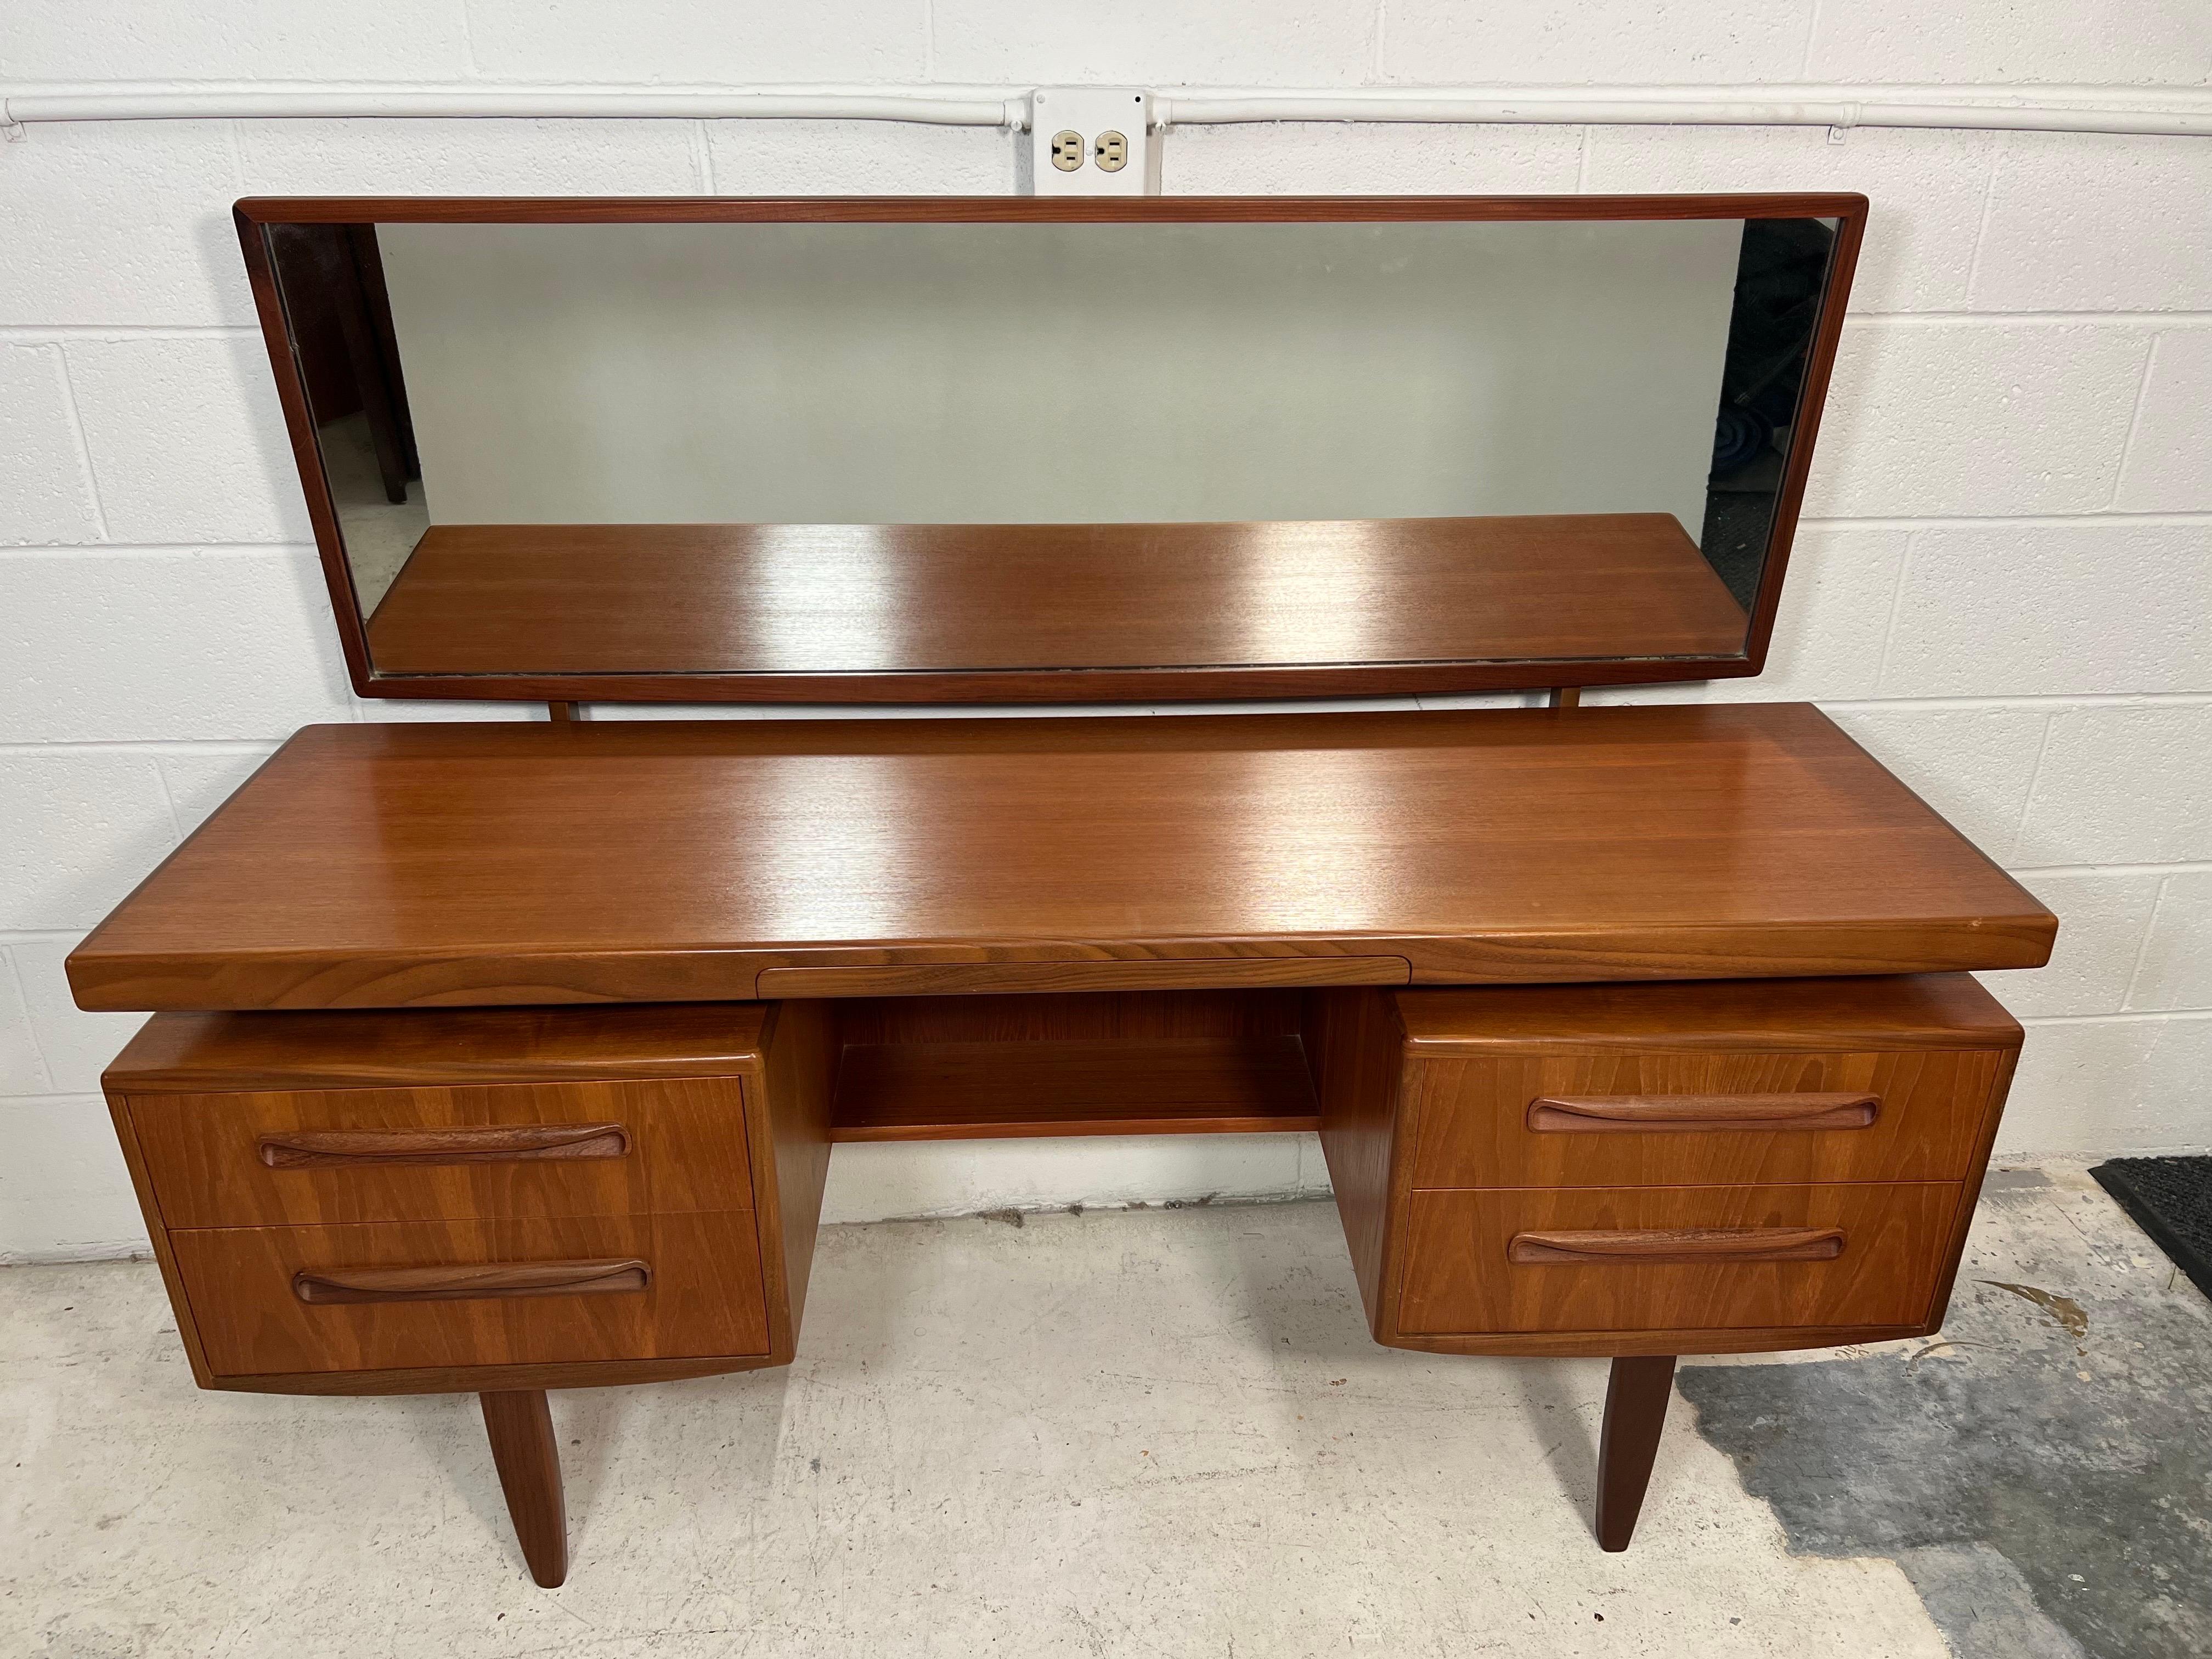 Fantastic mid-century teak vanity with stool. Designed in the 60s by Victor Bramwell Wilkins for G Plan's Fresco Range. Danish Modern in style. Secret drawer has original black fabric. Gorgeous continuous grain pattern on the front of the drawers.